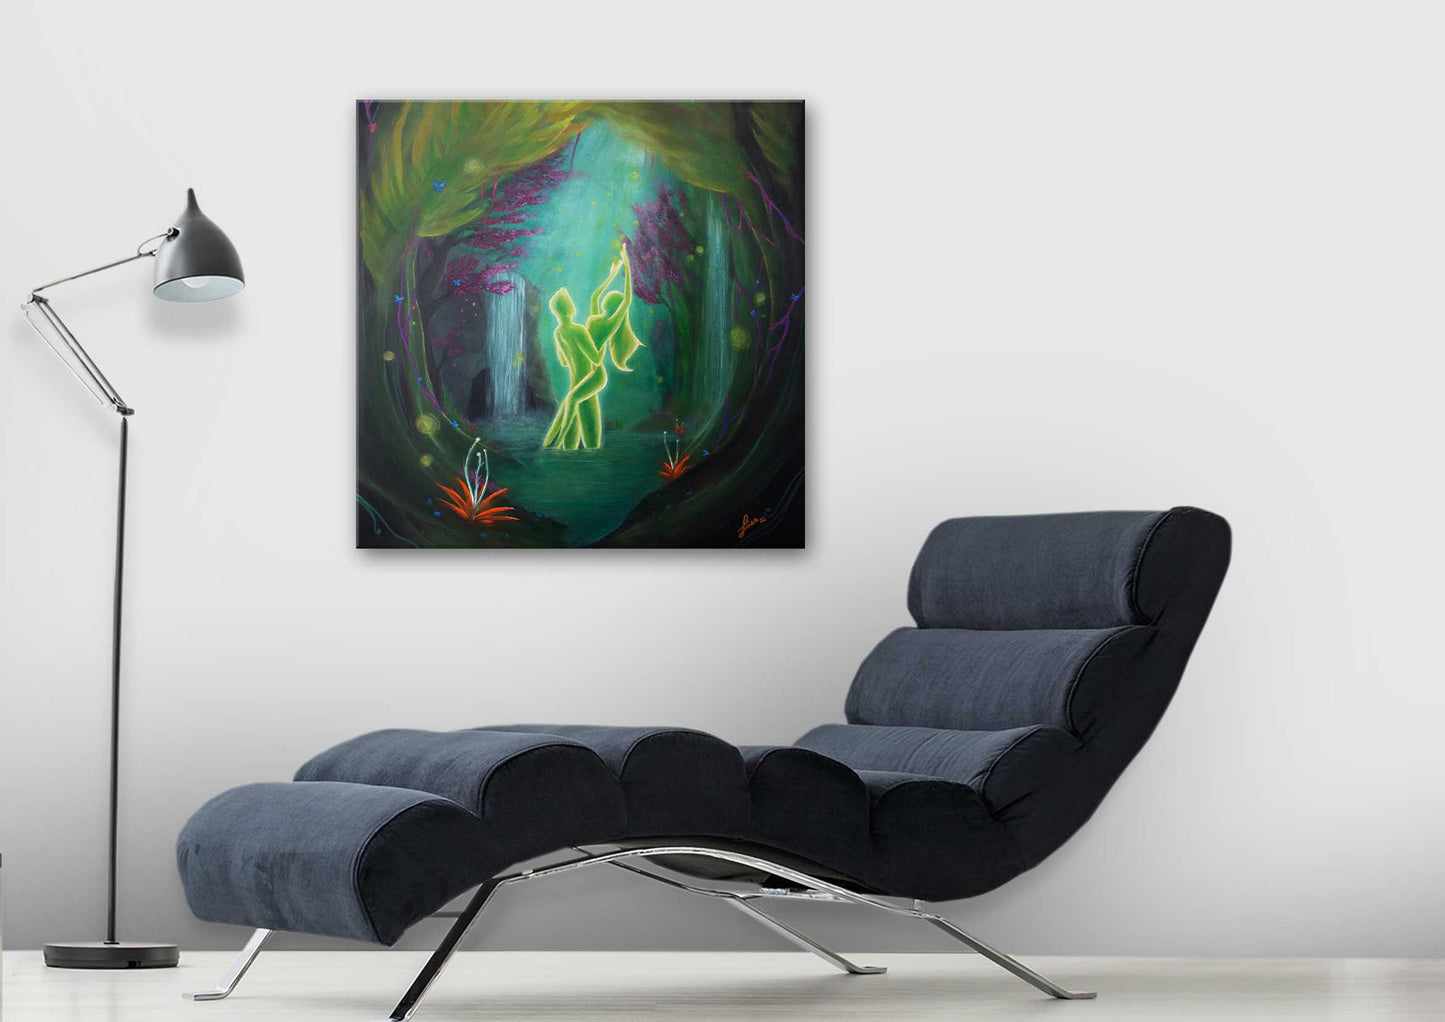 Soulmate Art, Spiritual Painting, Chakra art, Fantasy, Twin Flames Reunion, Surreal and Romantic gift, Acrylic painting on canvas, flammes jumelles, axys, fantastique, magie, amoureux